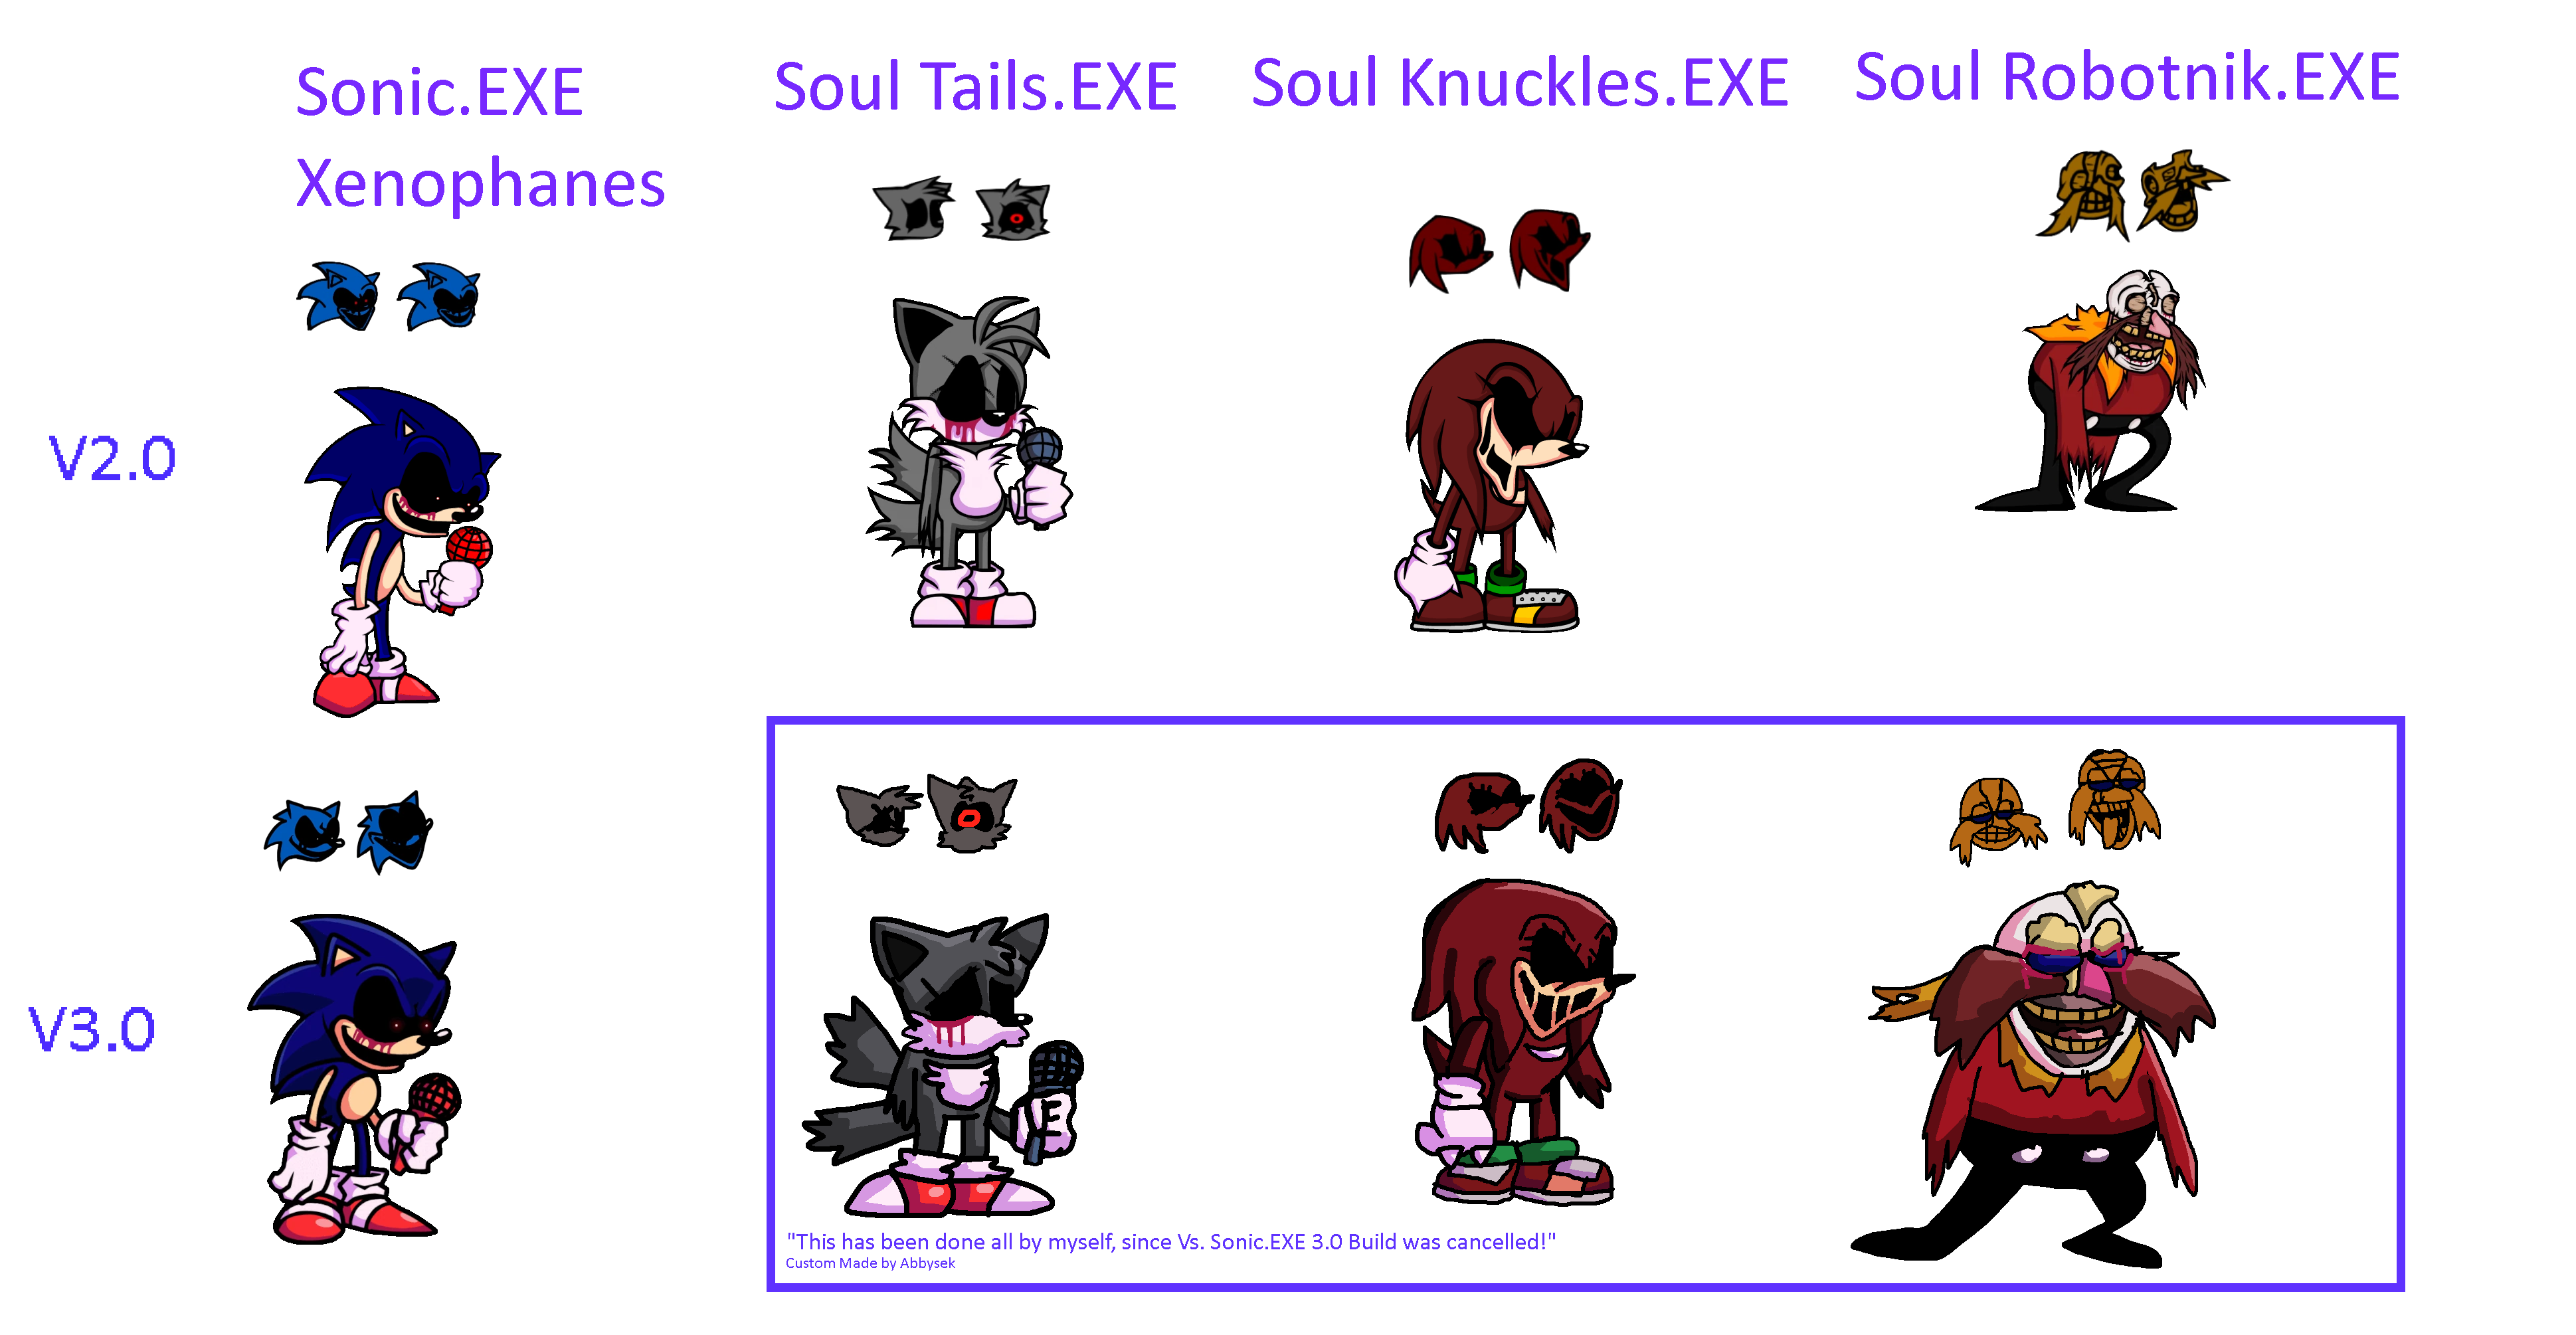 What If Vs. Sonic.EXE V2.0 had V3.0 Conversions by Abbysek on DeviantArt